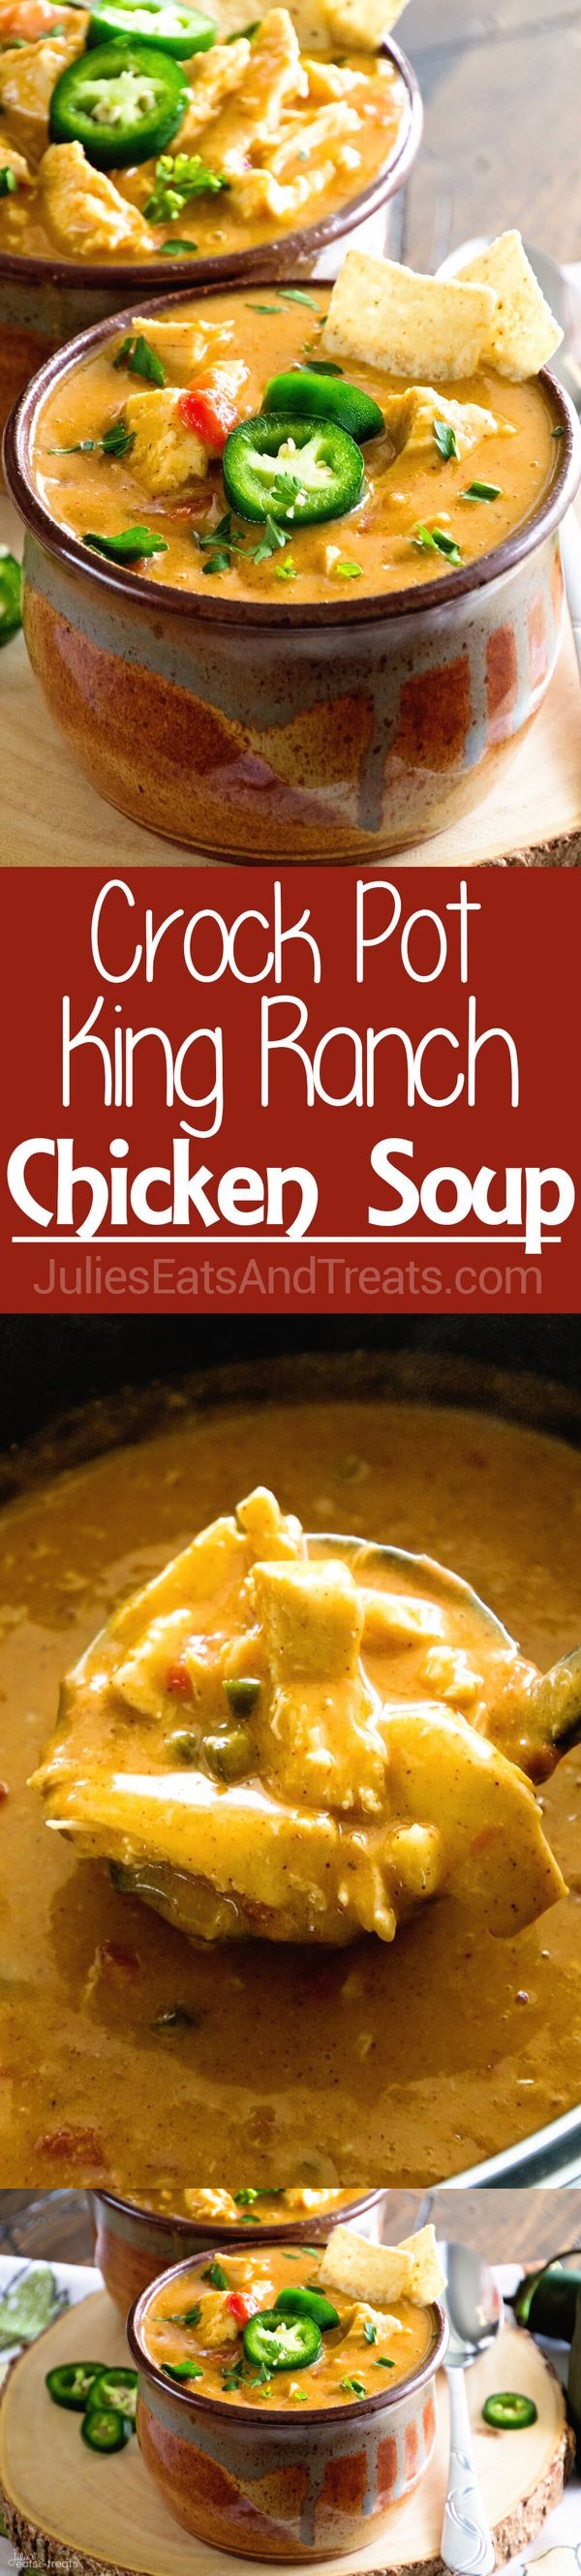 Slow Cooker King Ranch Chicken Soup